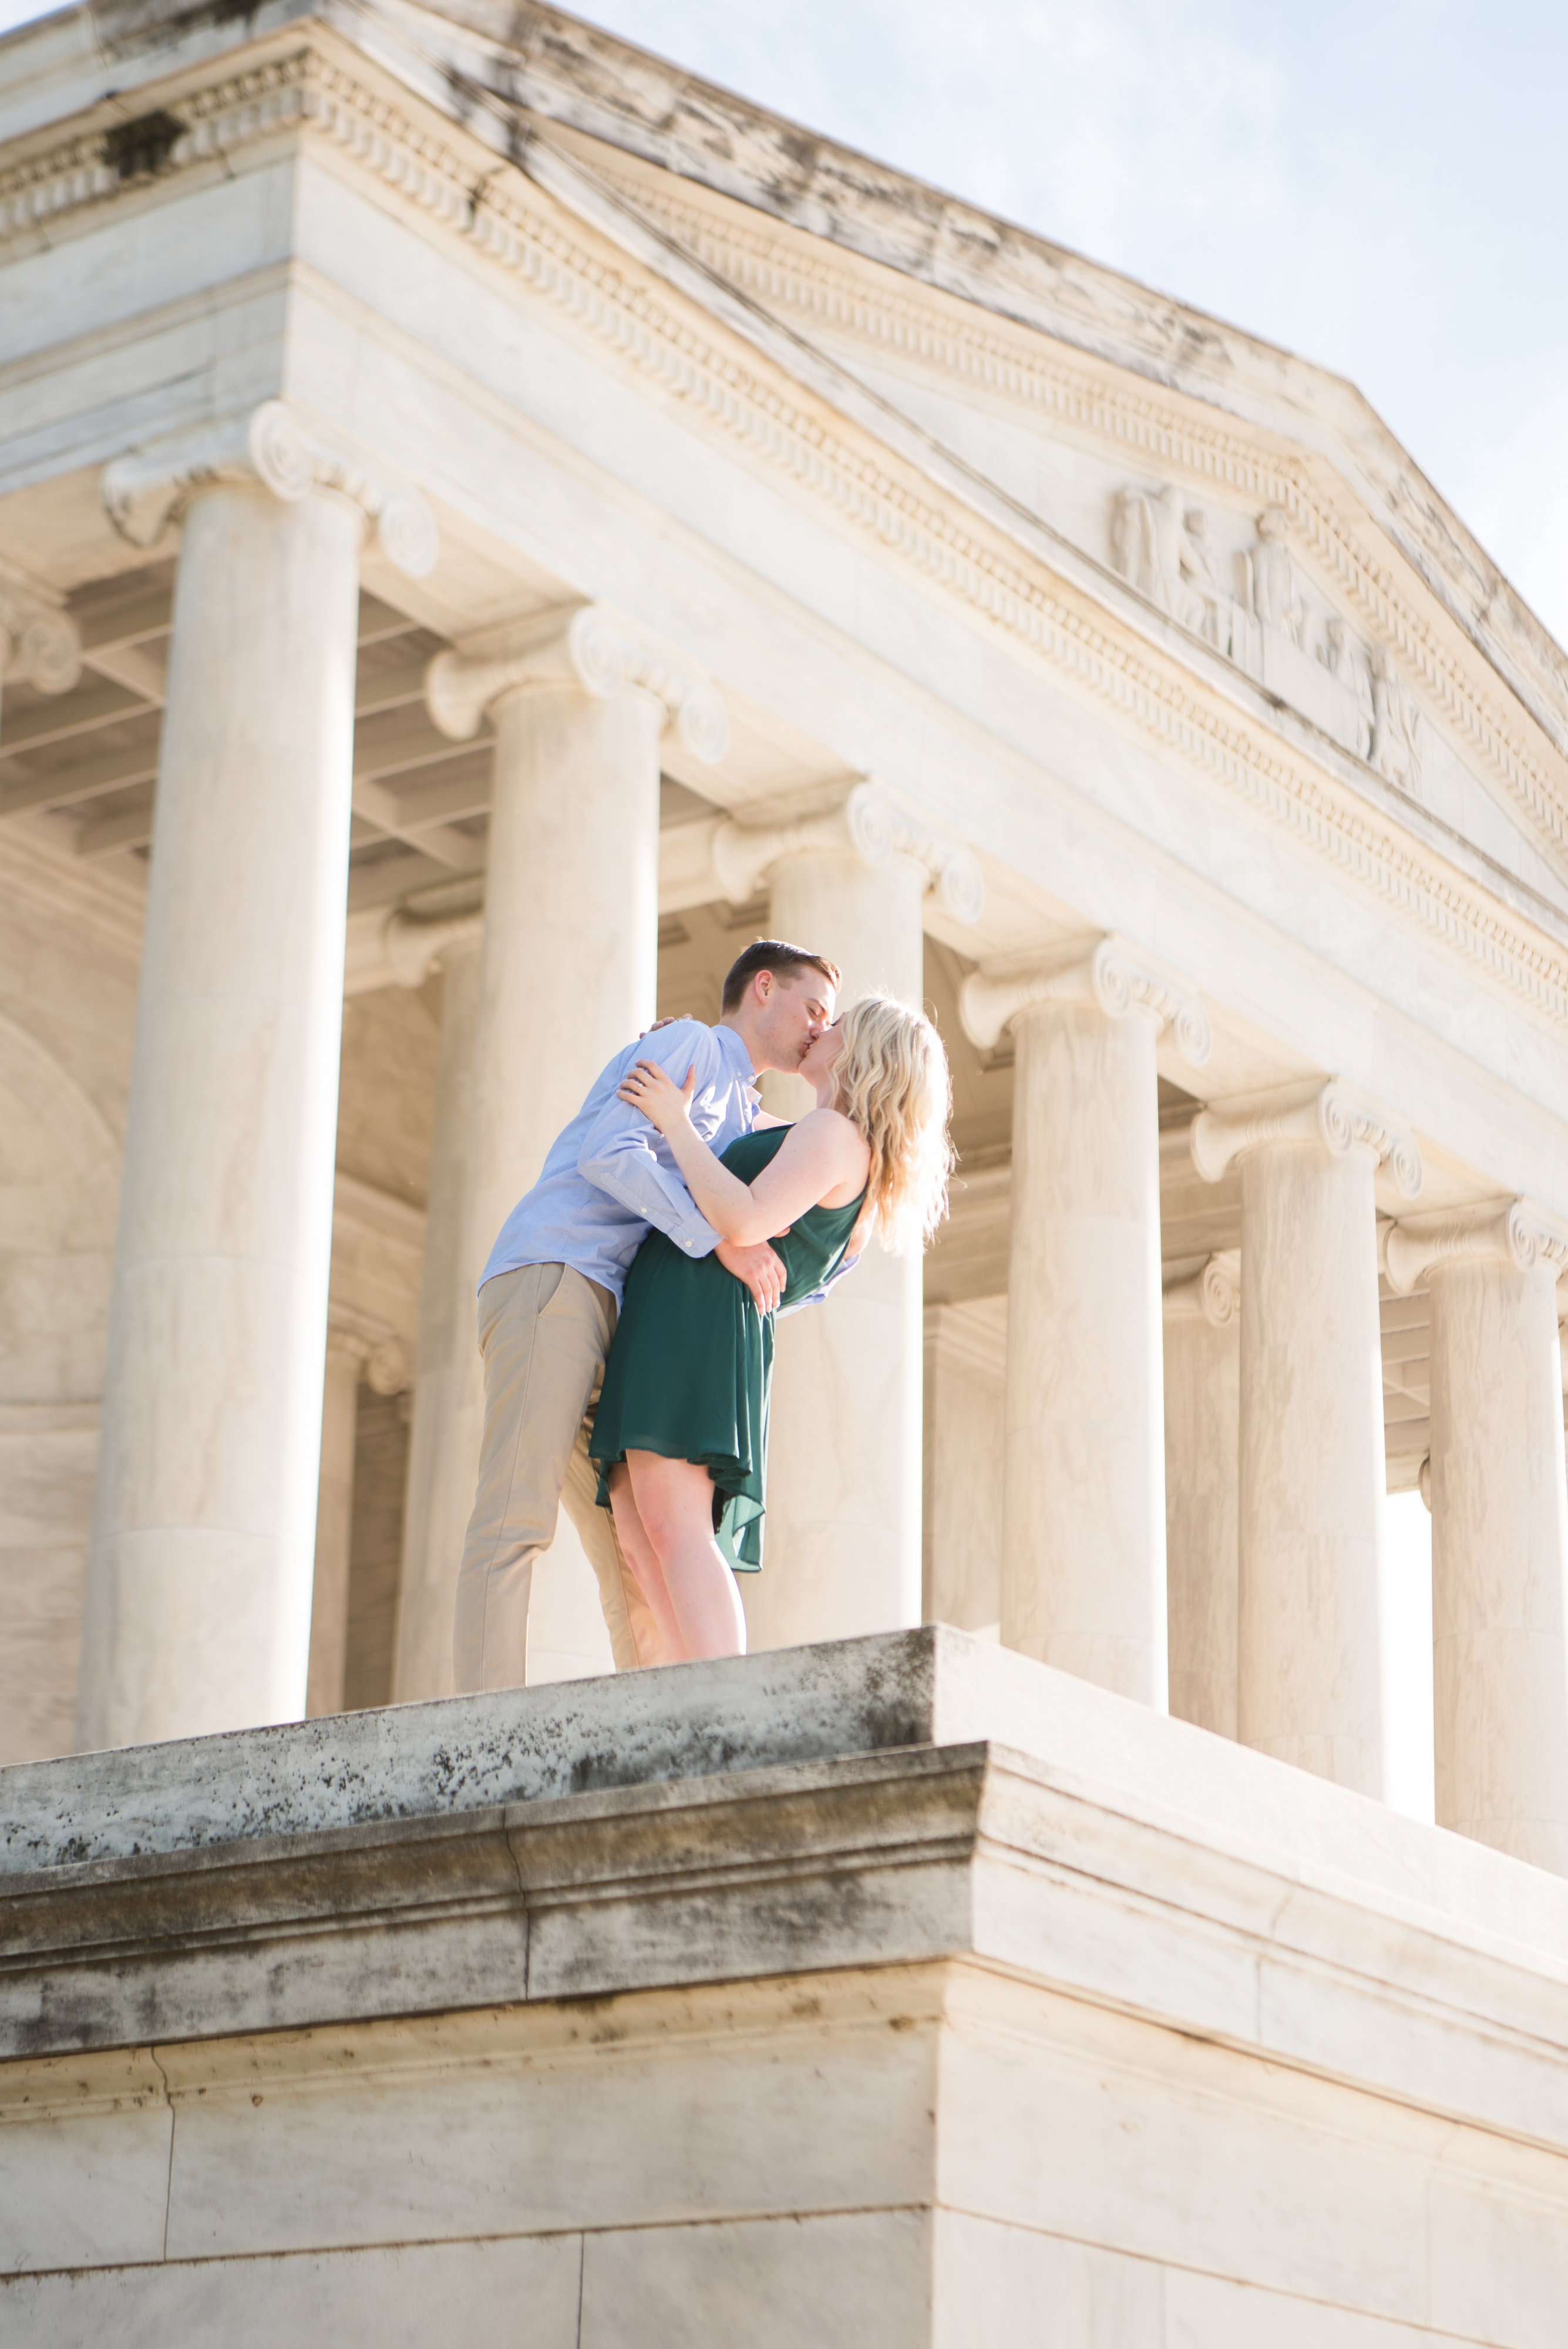 View More: https://carlyfullerphotography.pass.us/hannah-nick-engagement